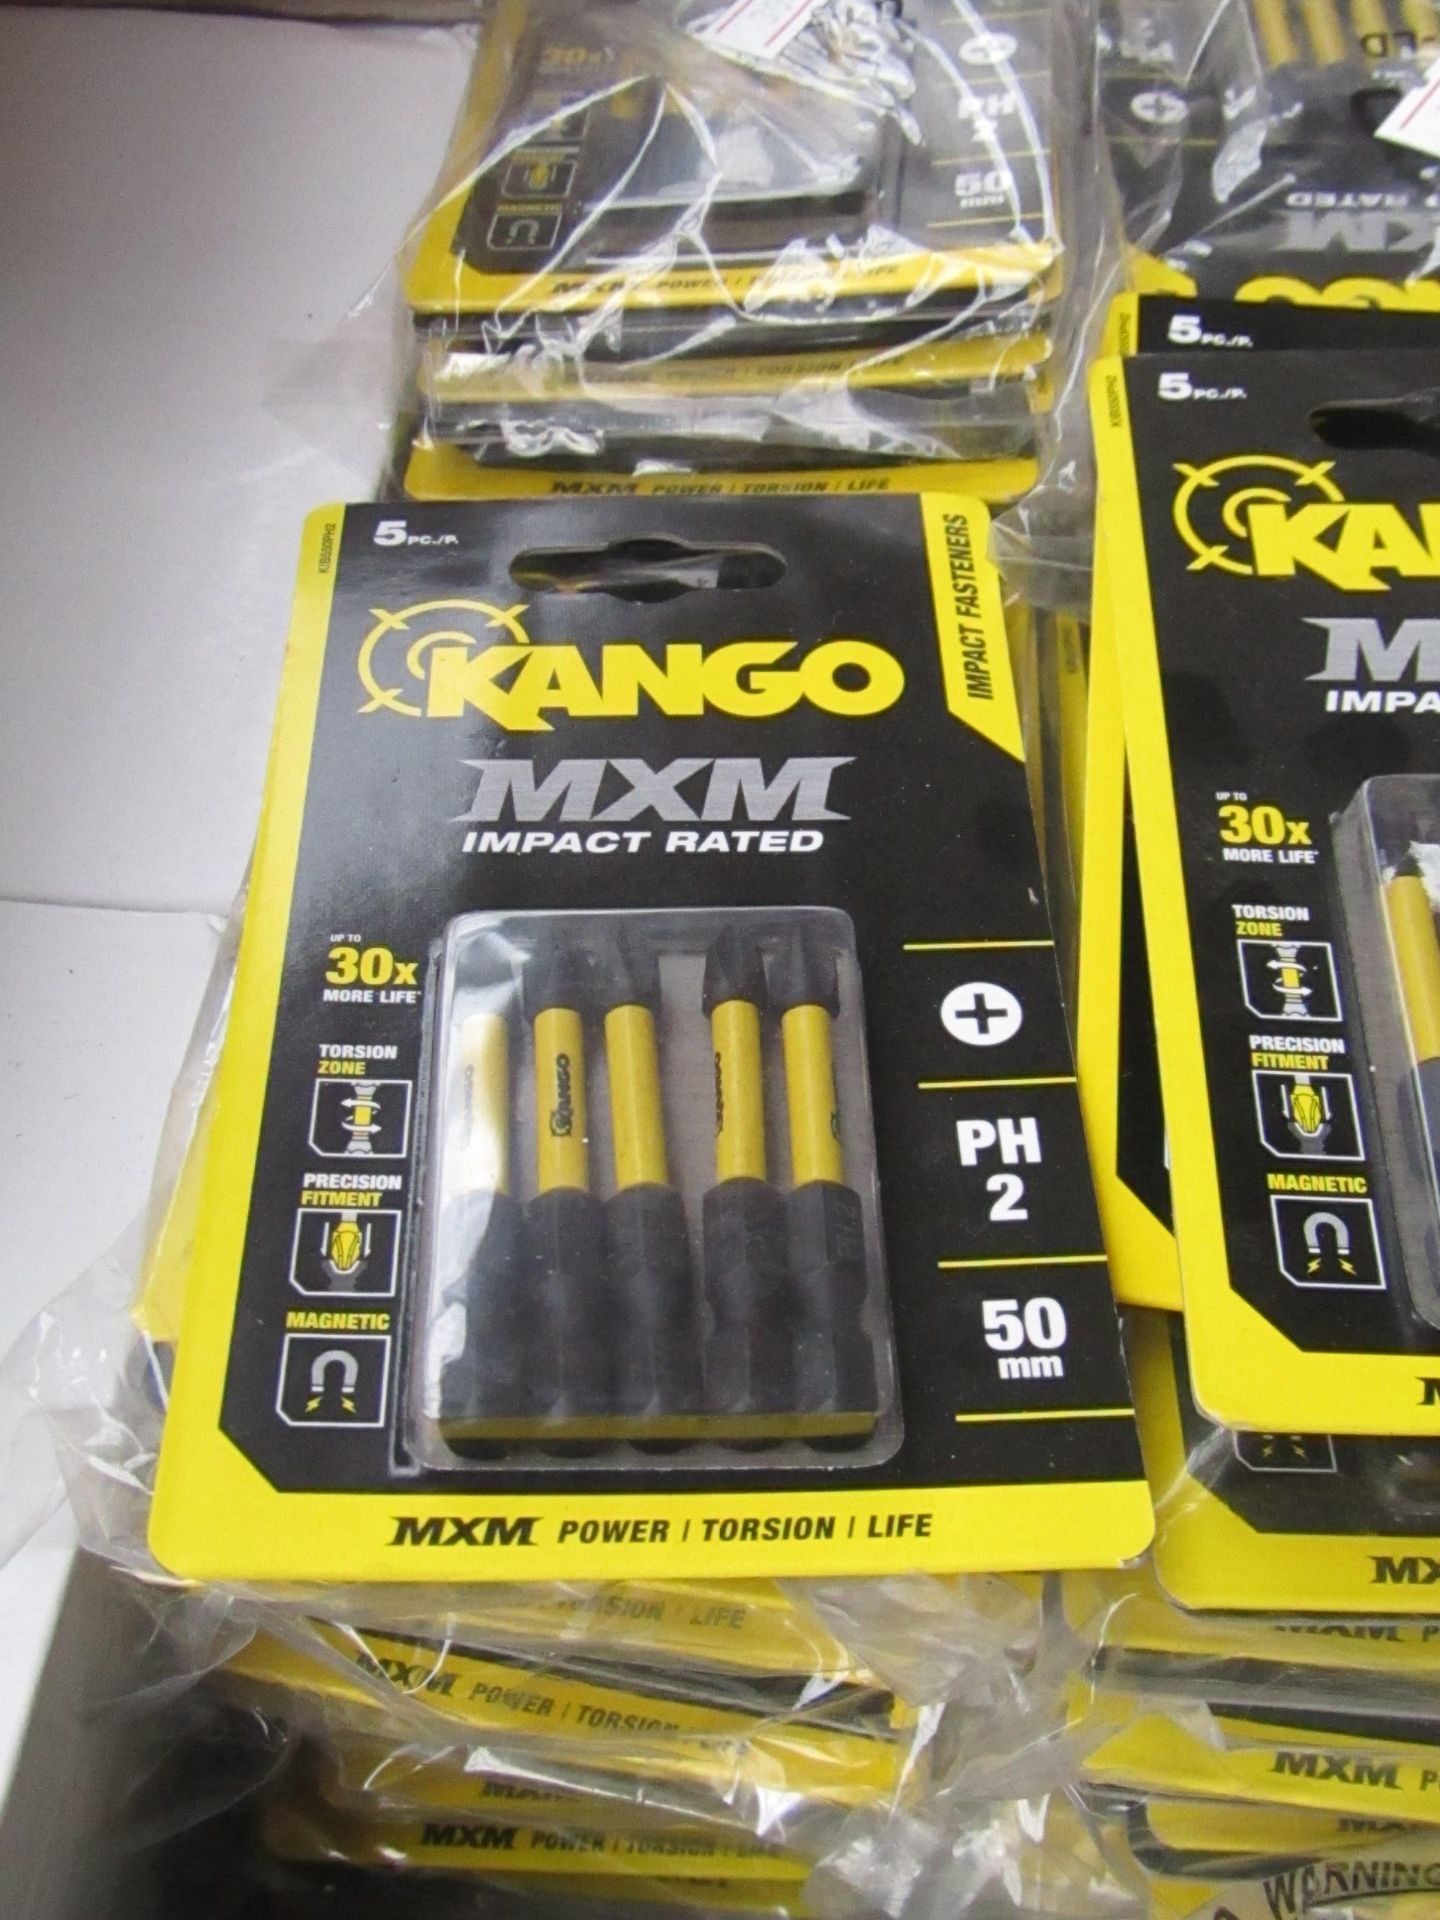 kango Impact rated PH2 driver bits, new and packaged